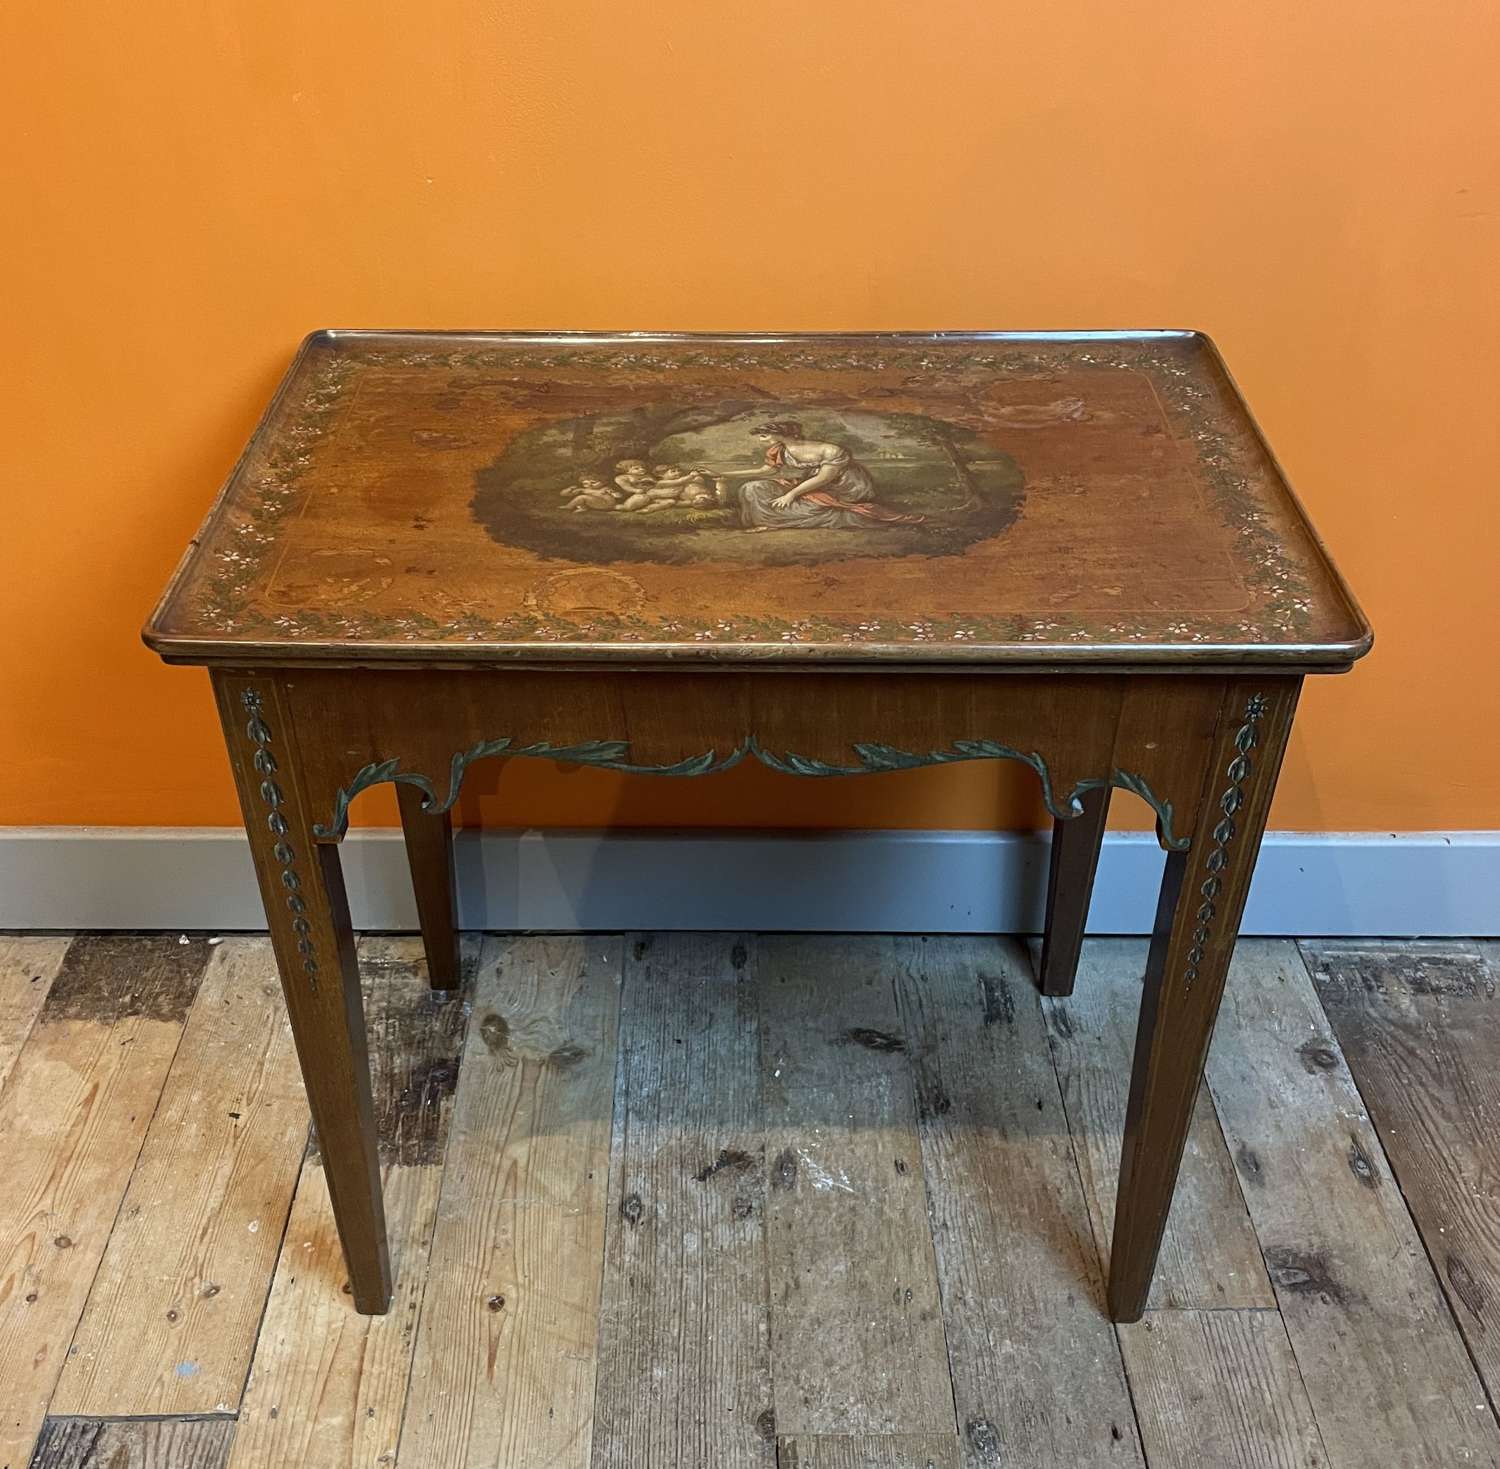 Georgian Silver Table Painted with a Neo-Classical Scene